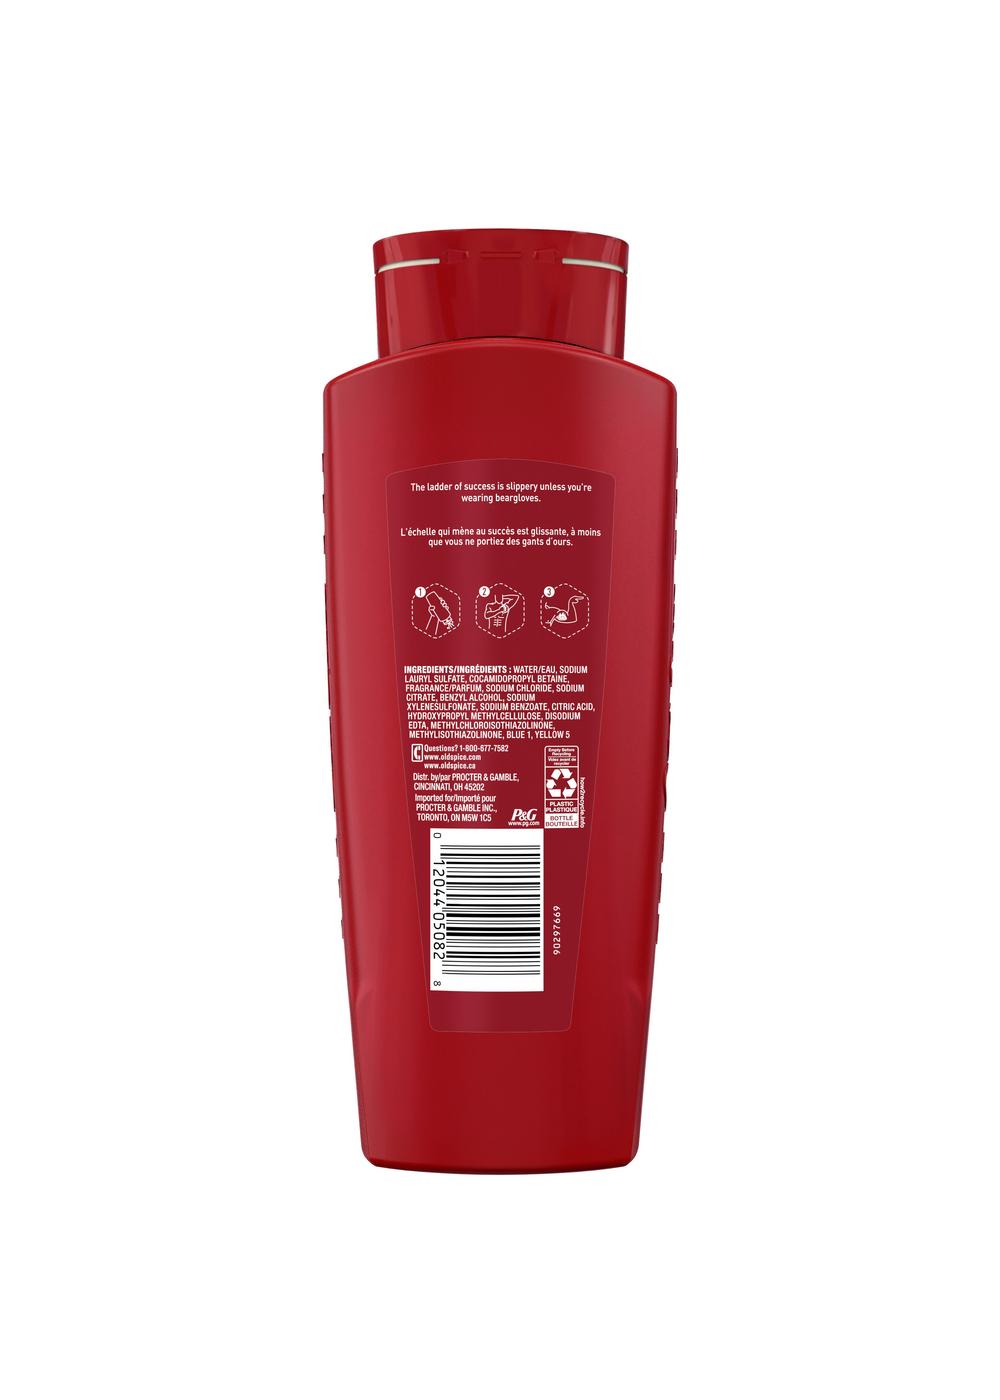 Old Spice Body Wash - Bearglove; image 2 of 2